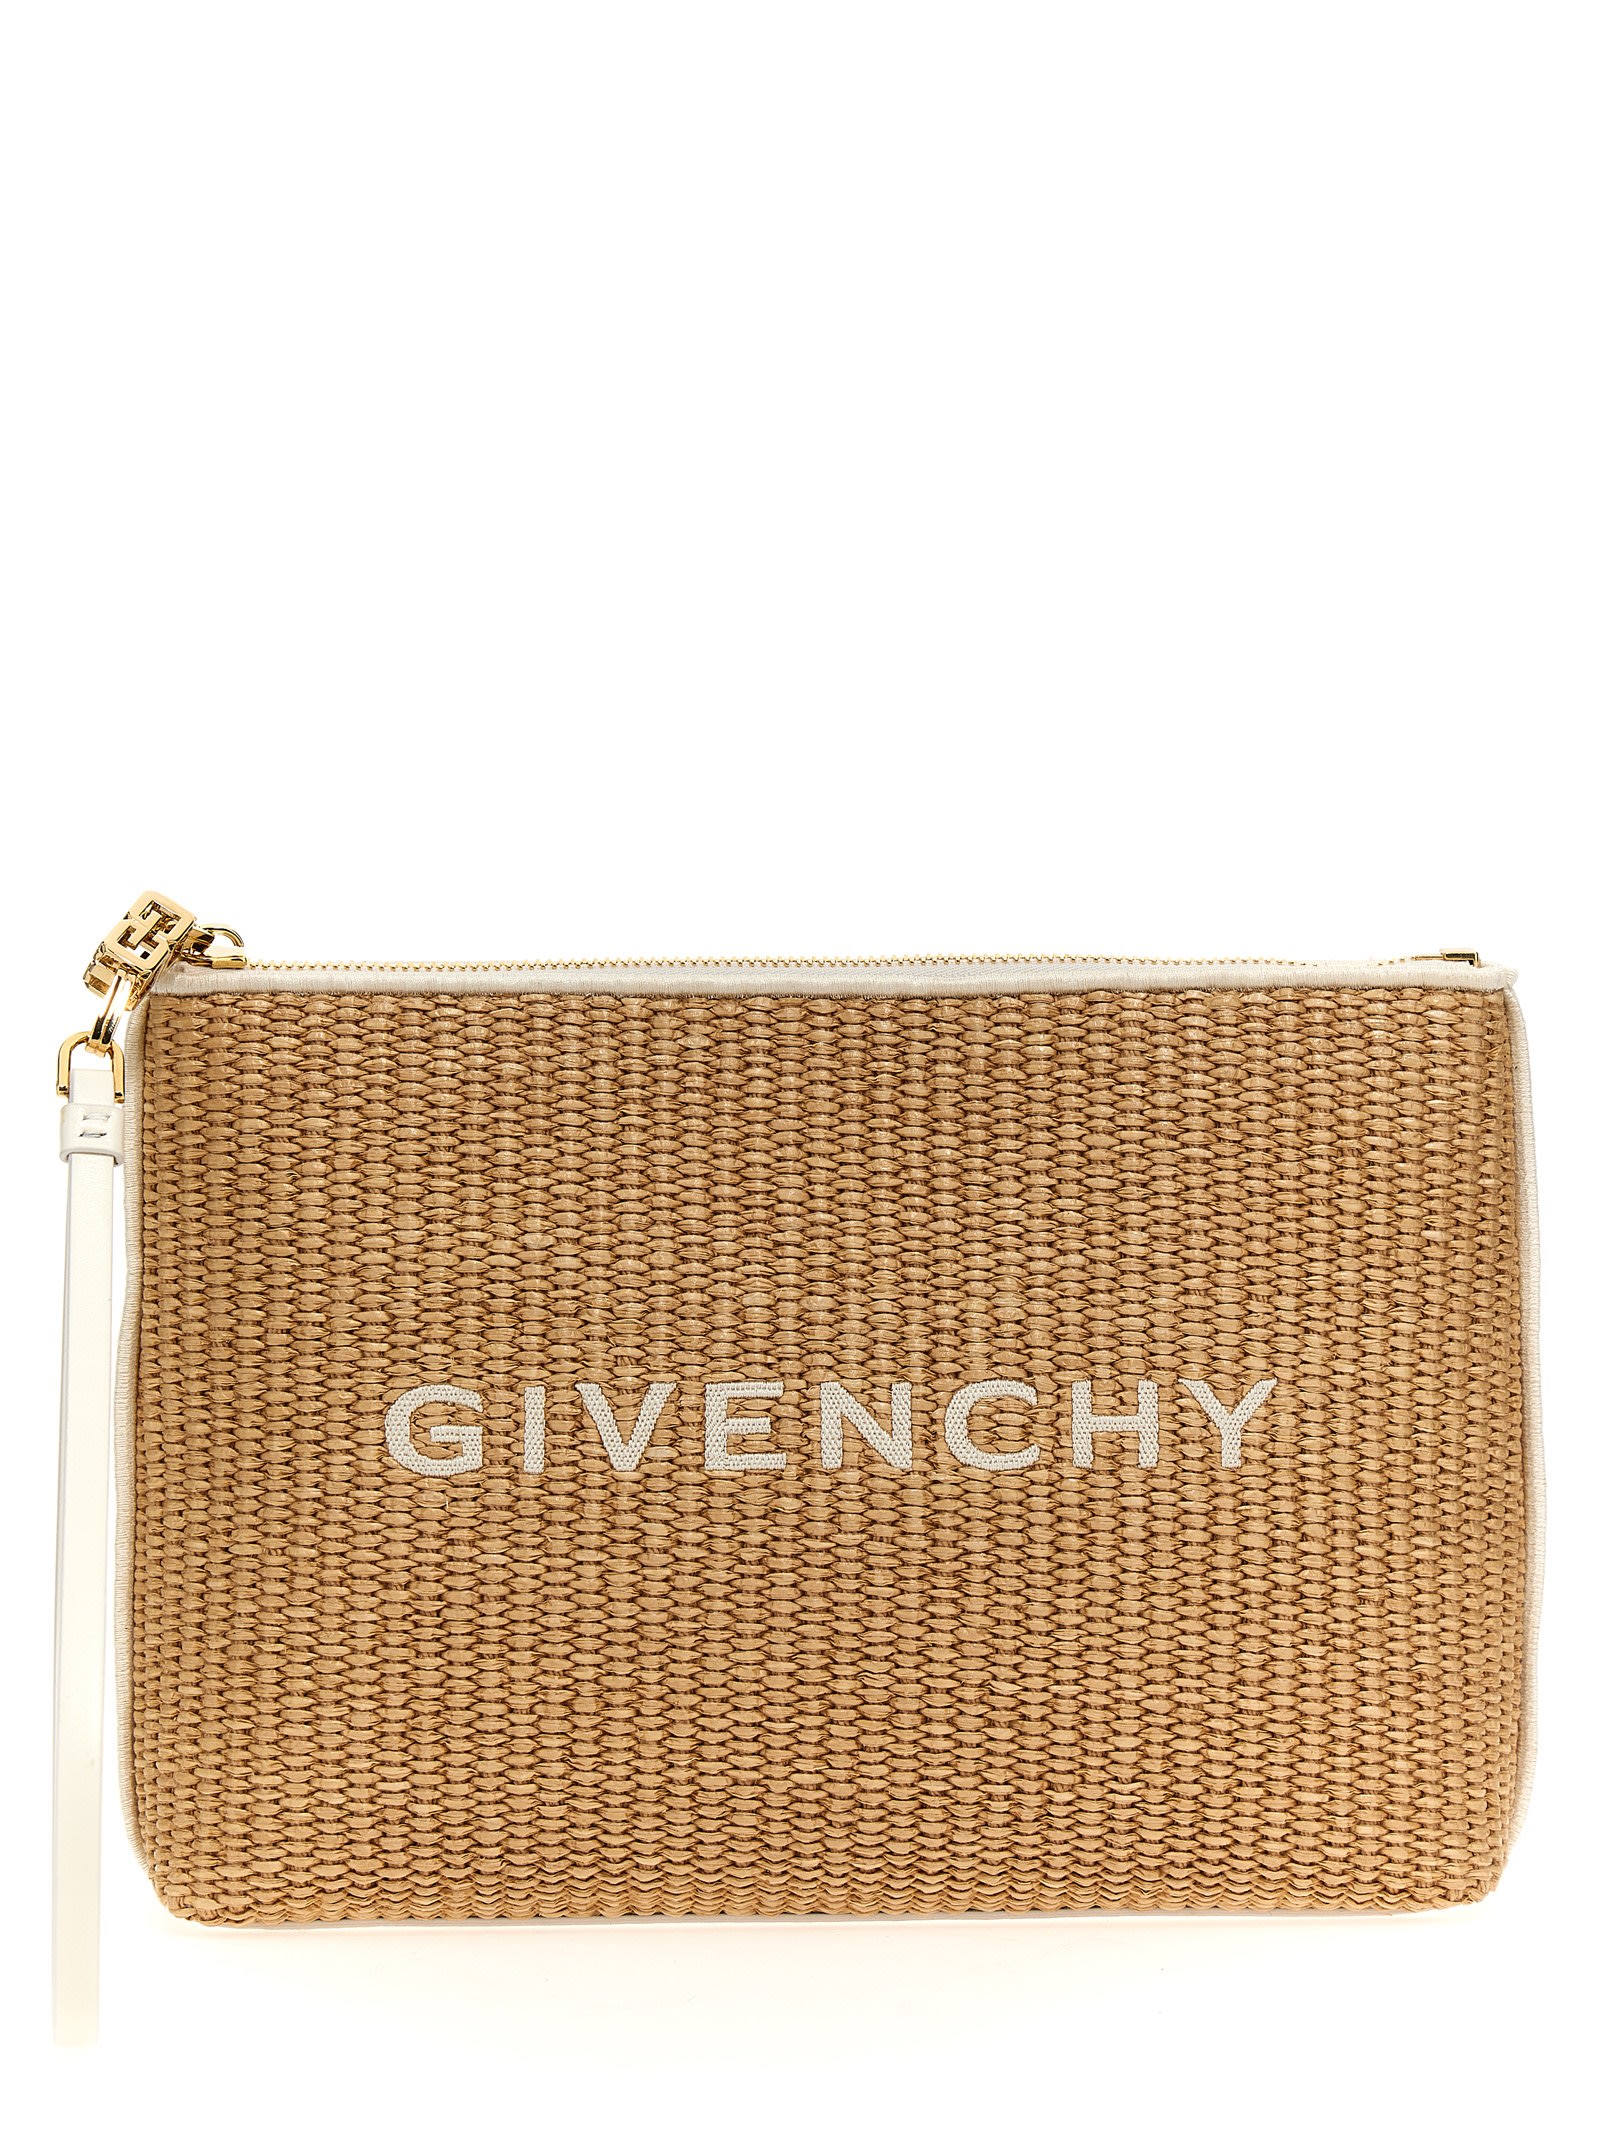 Givenchy Clutch In Beige